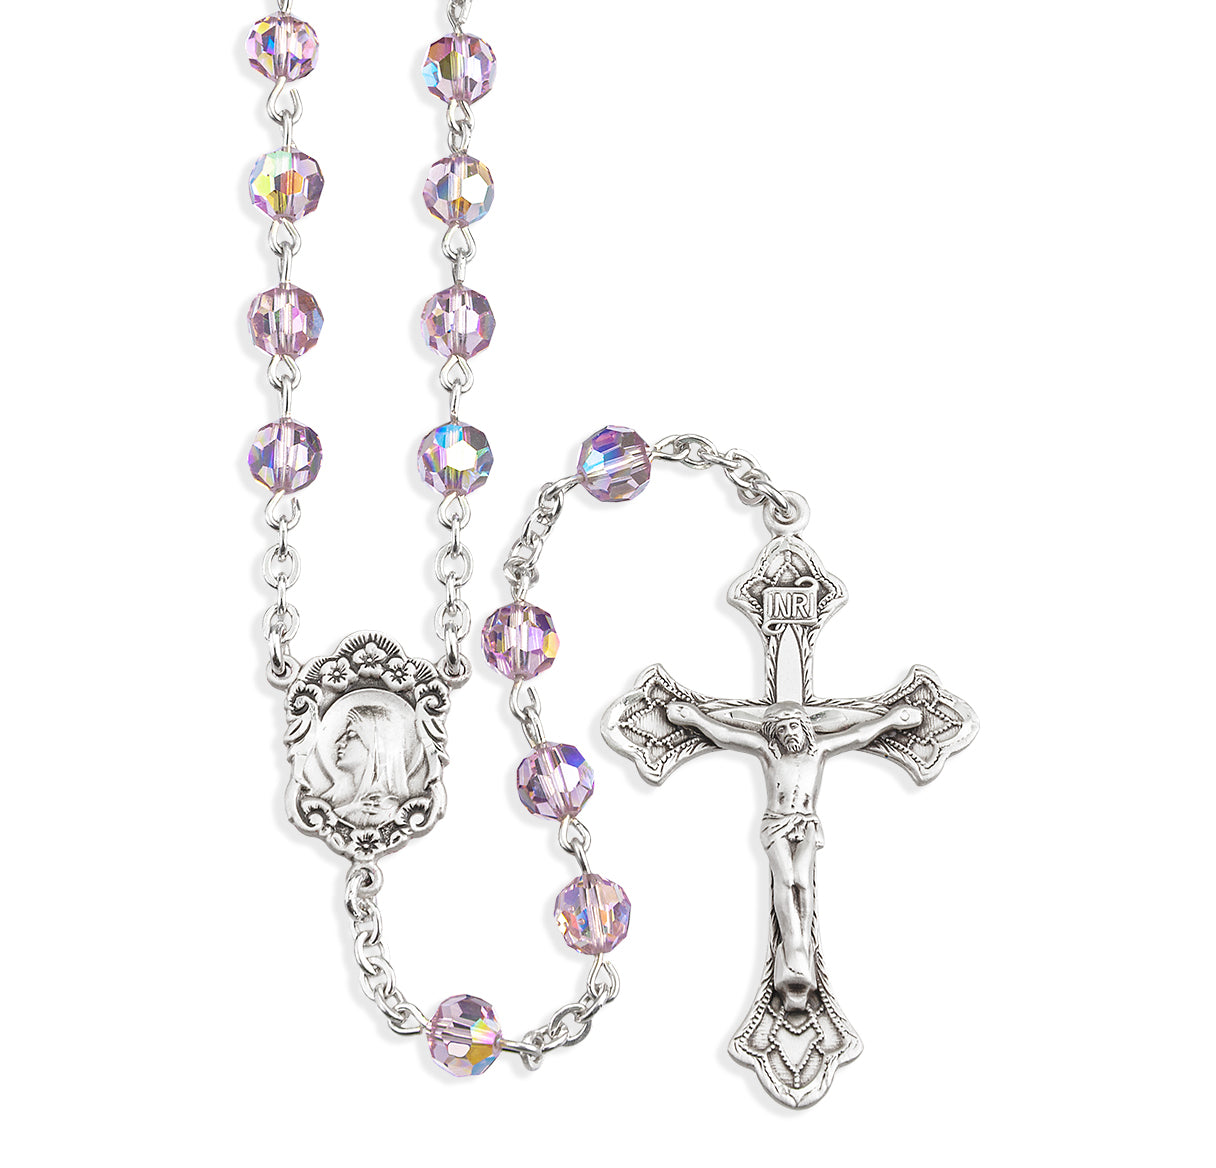 Sterling Silver Rosary Hand Made with Swarovski Crystal 6mm Light Amethyst Faceted Round Beads by HMH